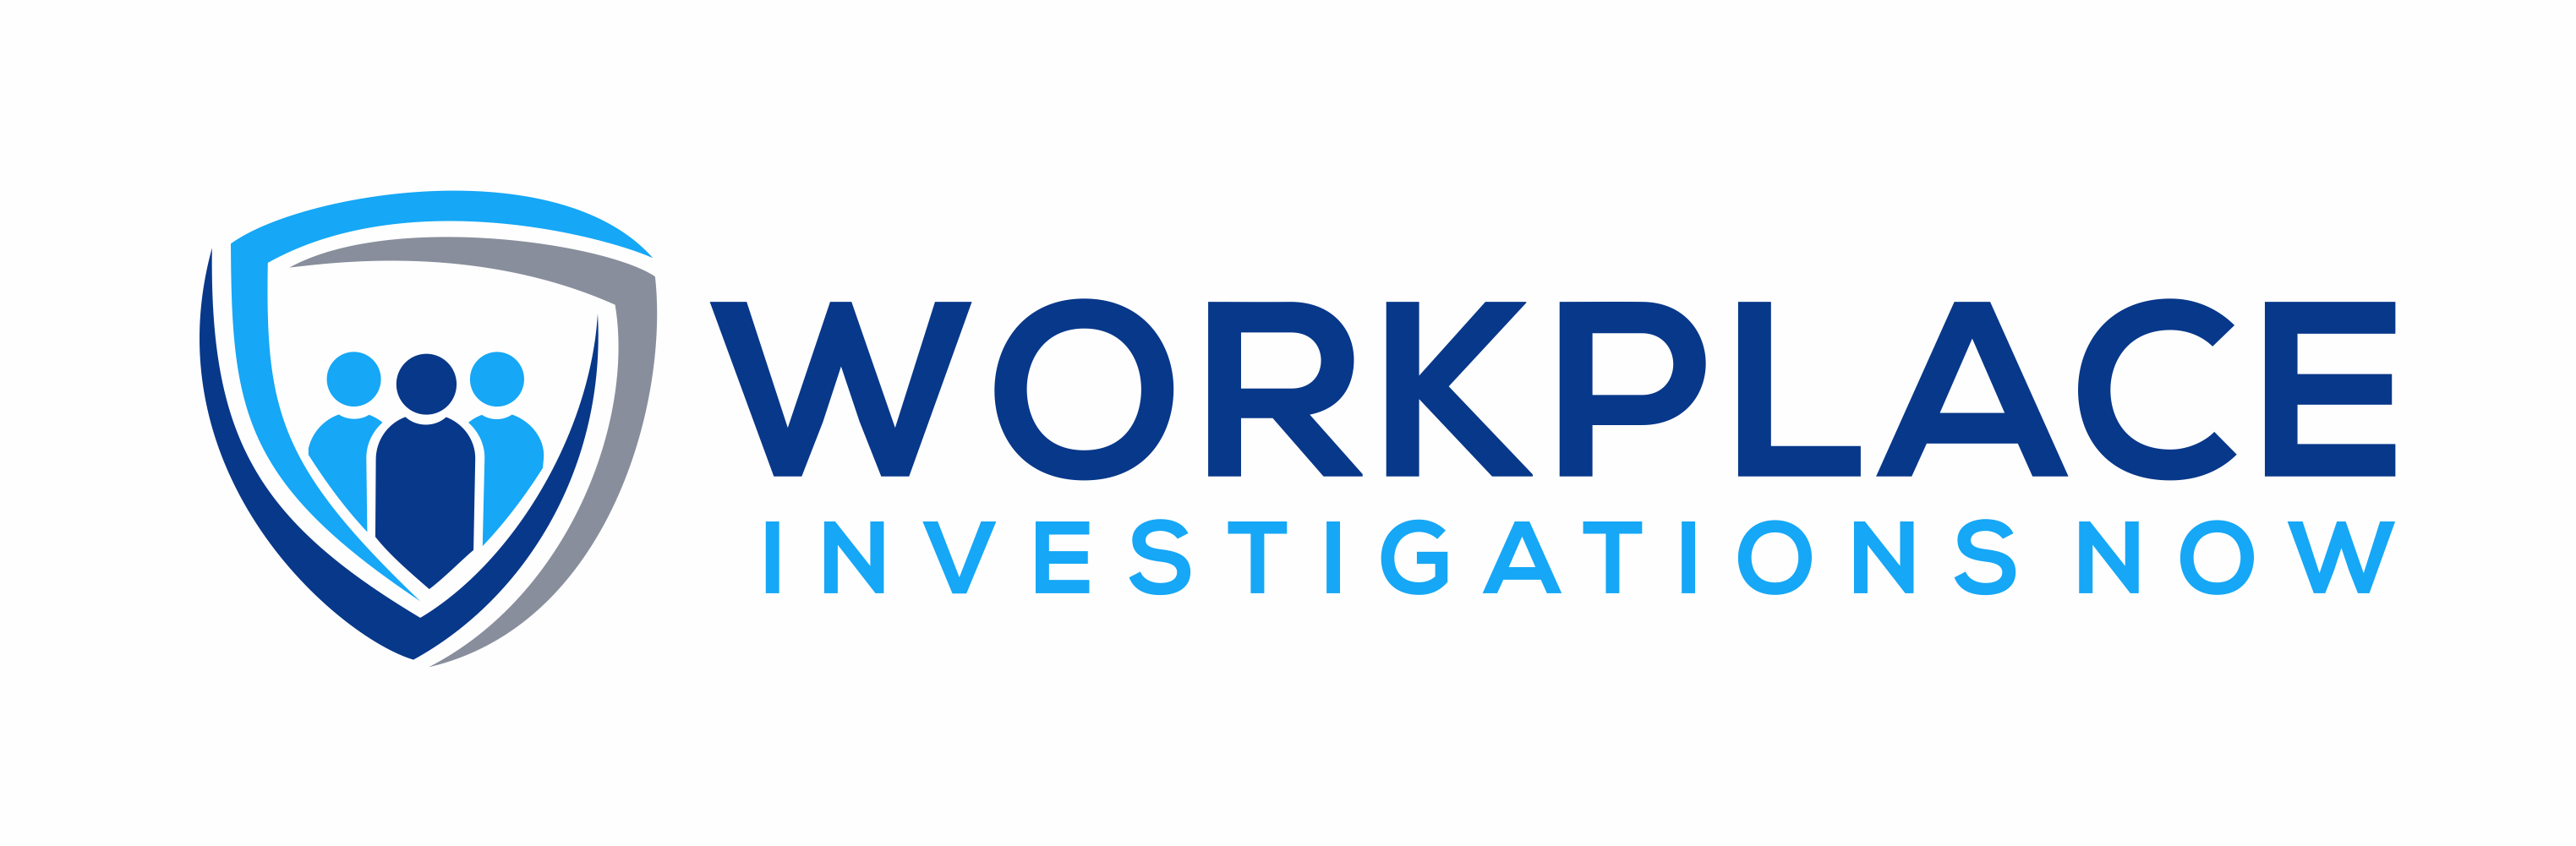 Workplace Investigations Now Logo